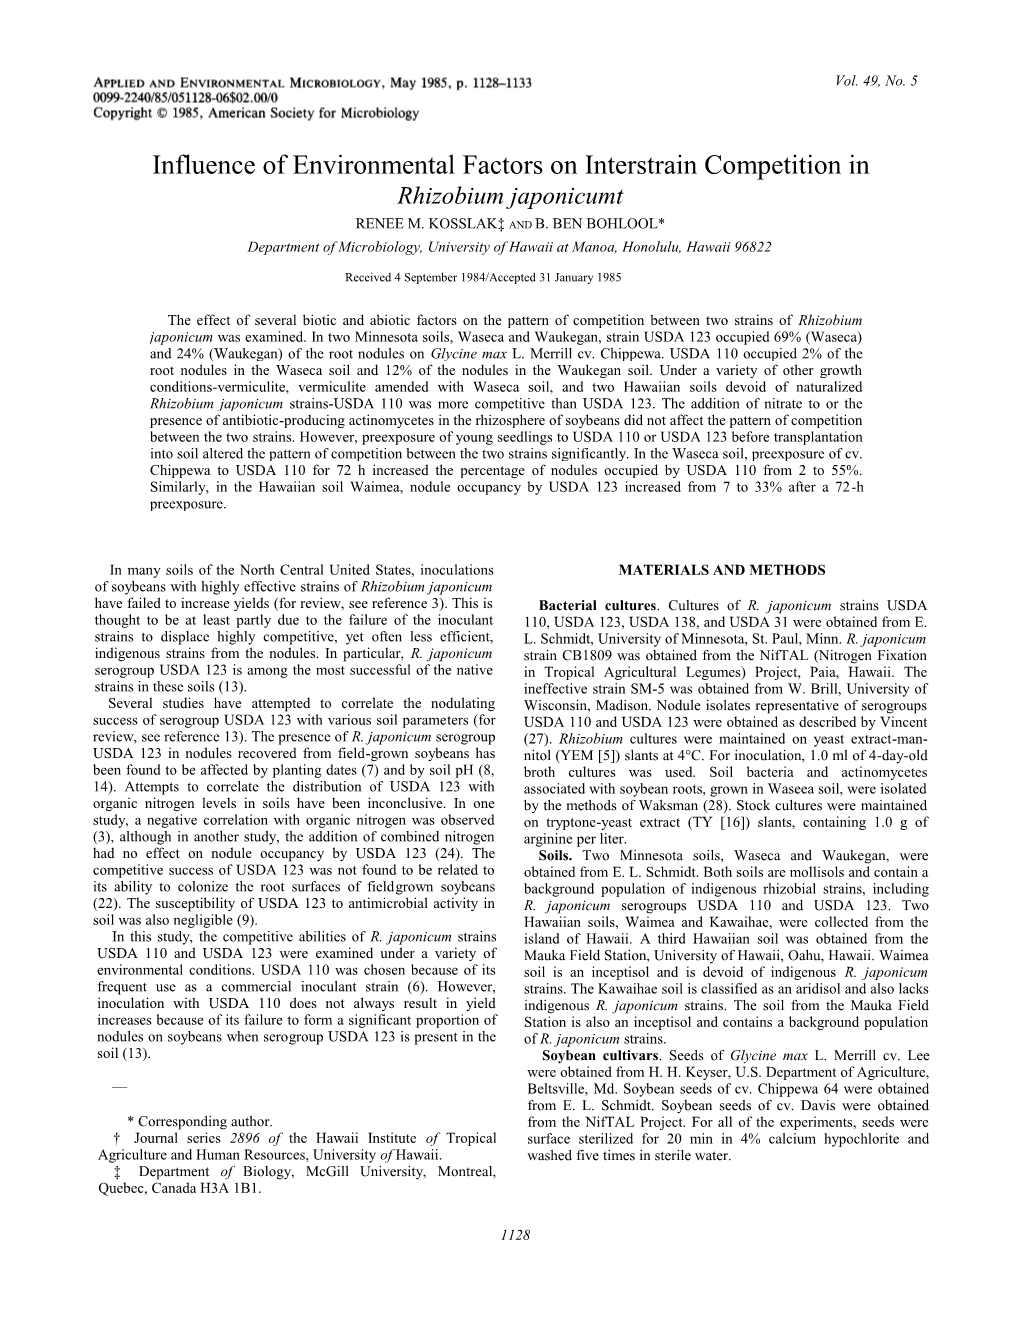 The Effect of Several Biotic and Abiotic Factors on the Pattern of Competition Between